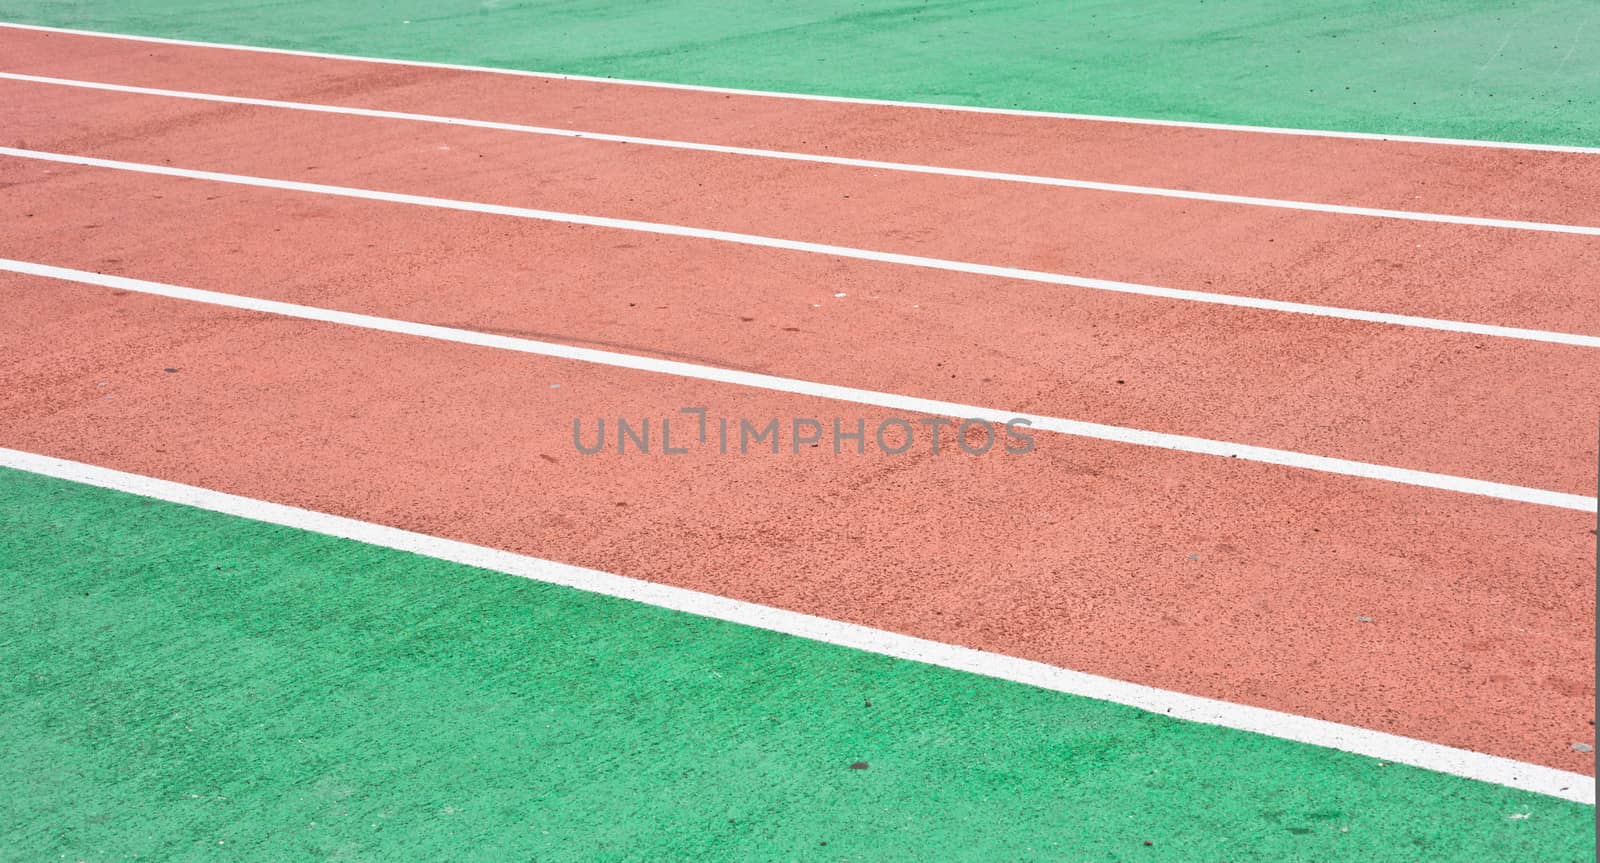 Lanes of a racing track as a background image